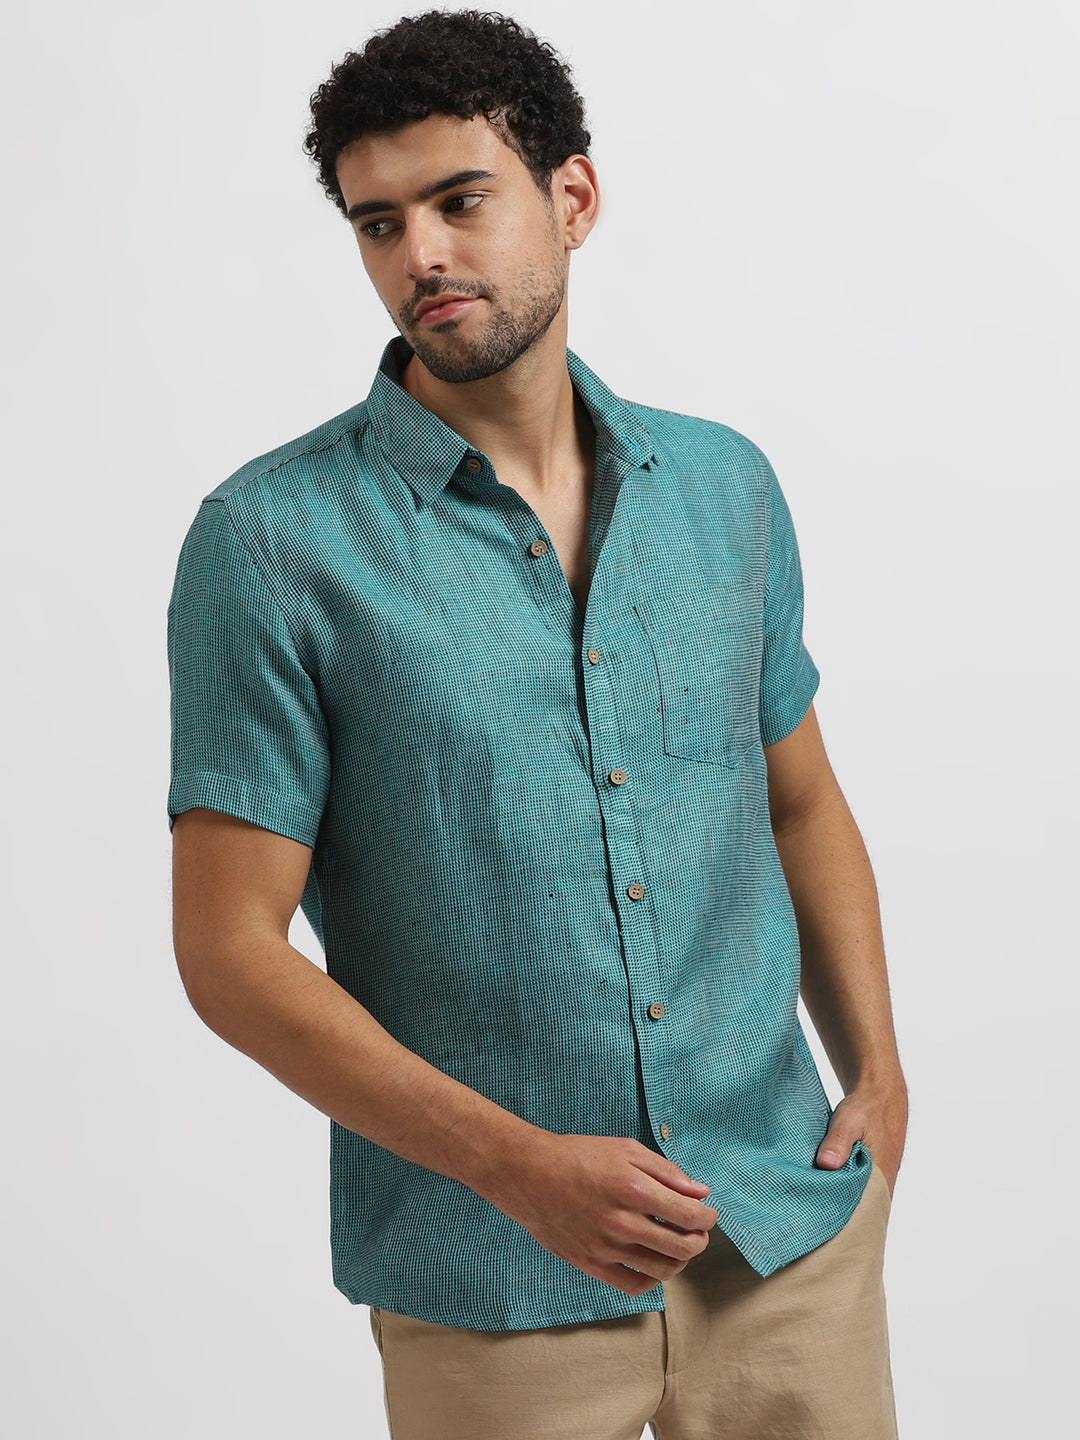 Carlose - Pure Linen Half Sleeve Shirt - Turquoise Blue Houndstooth